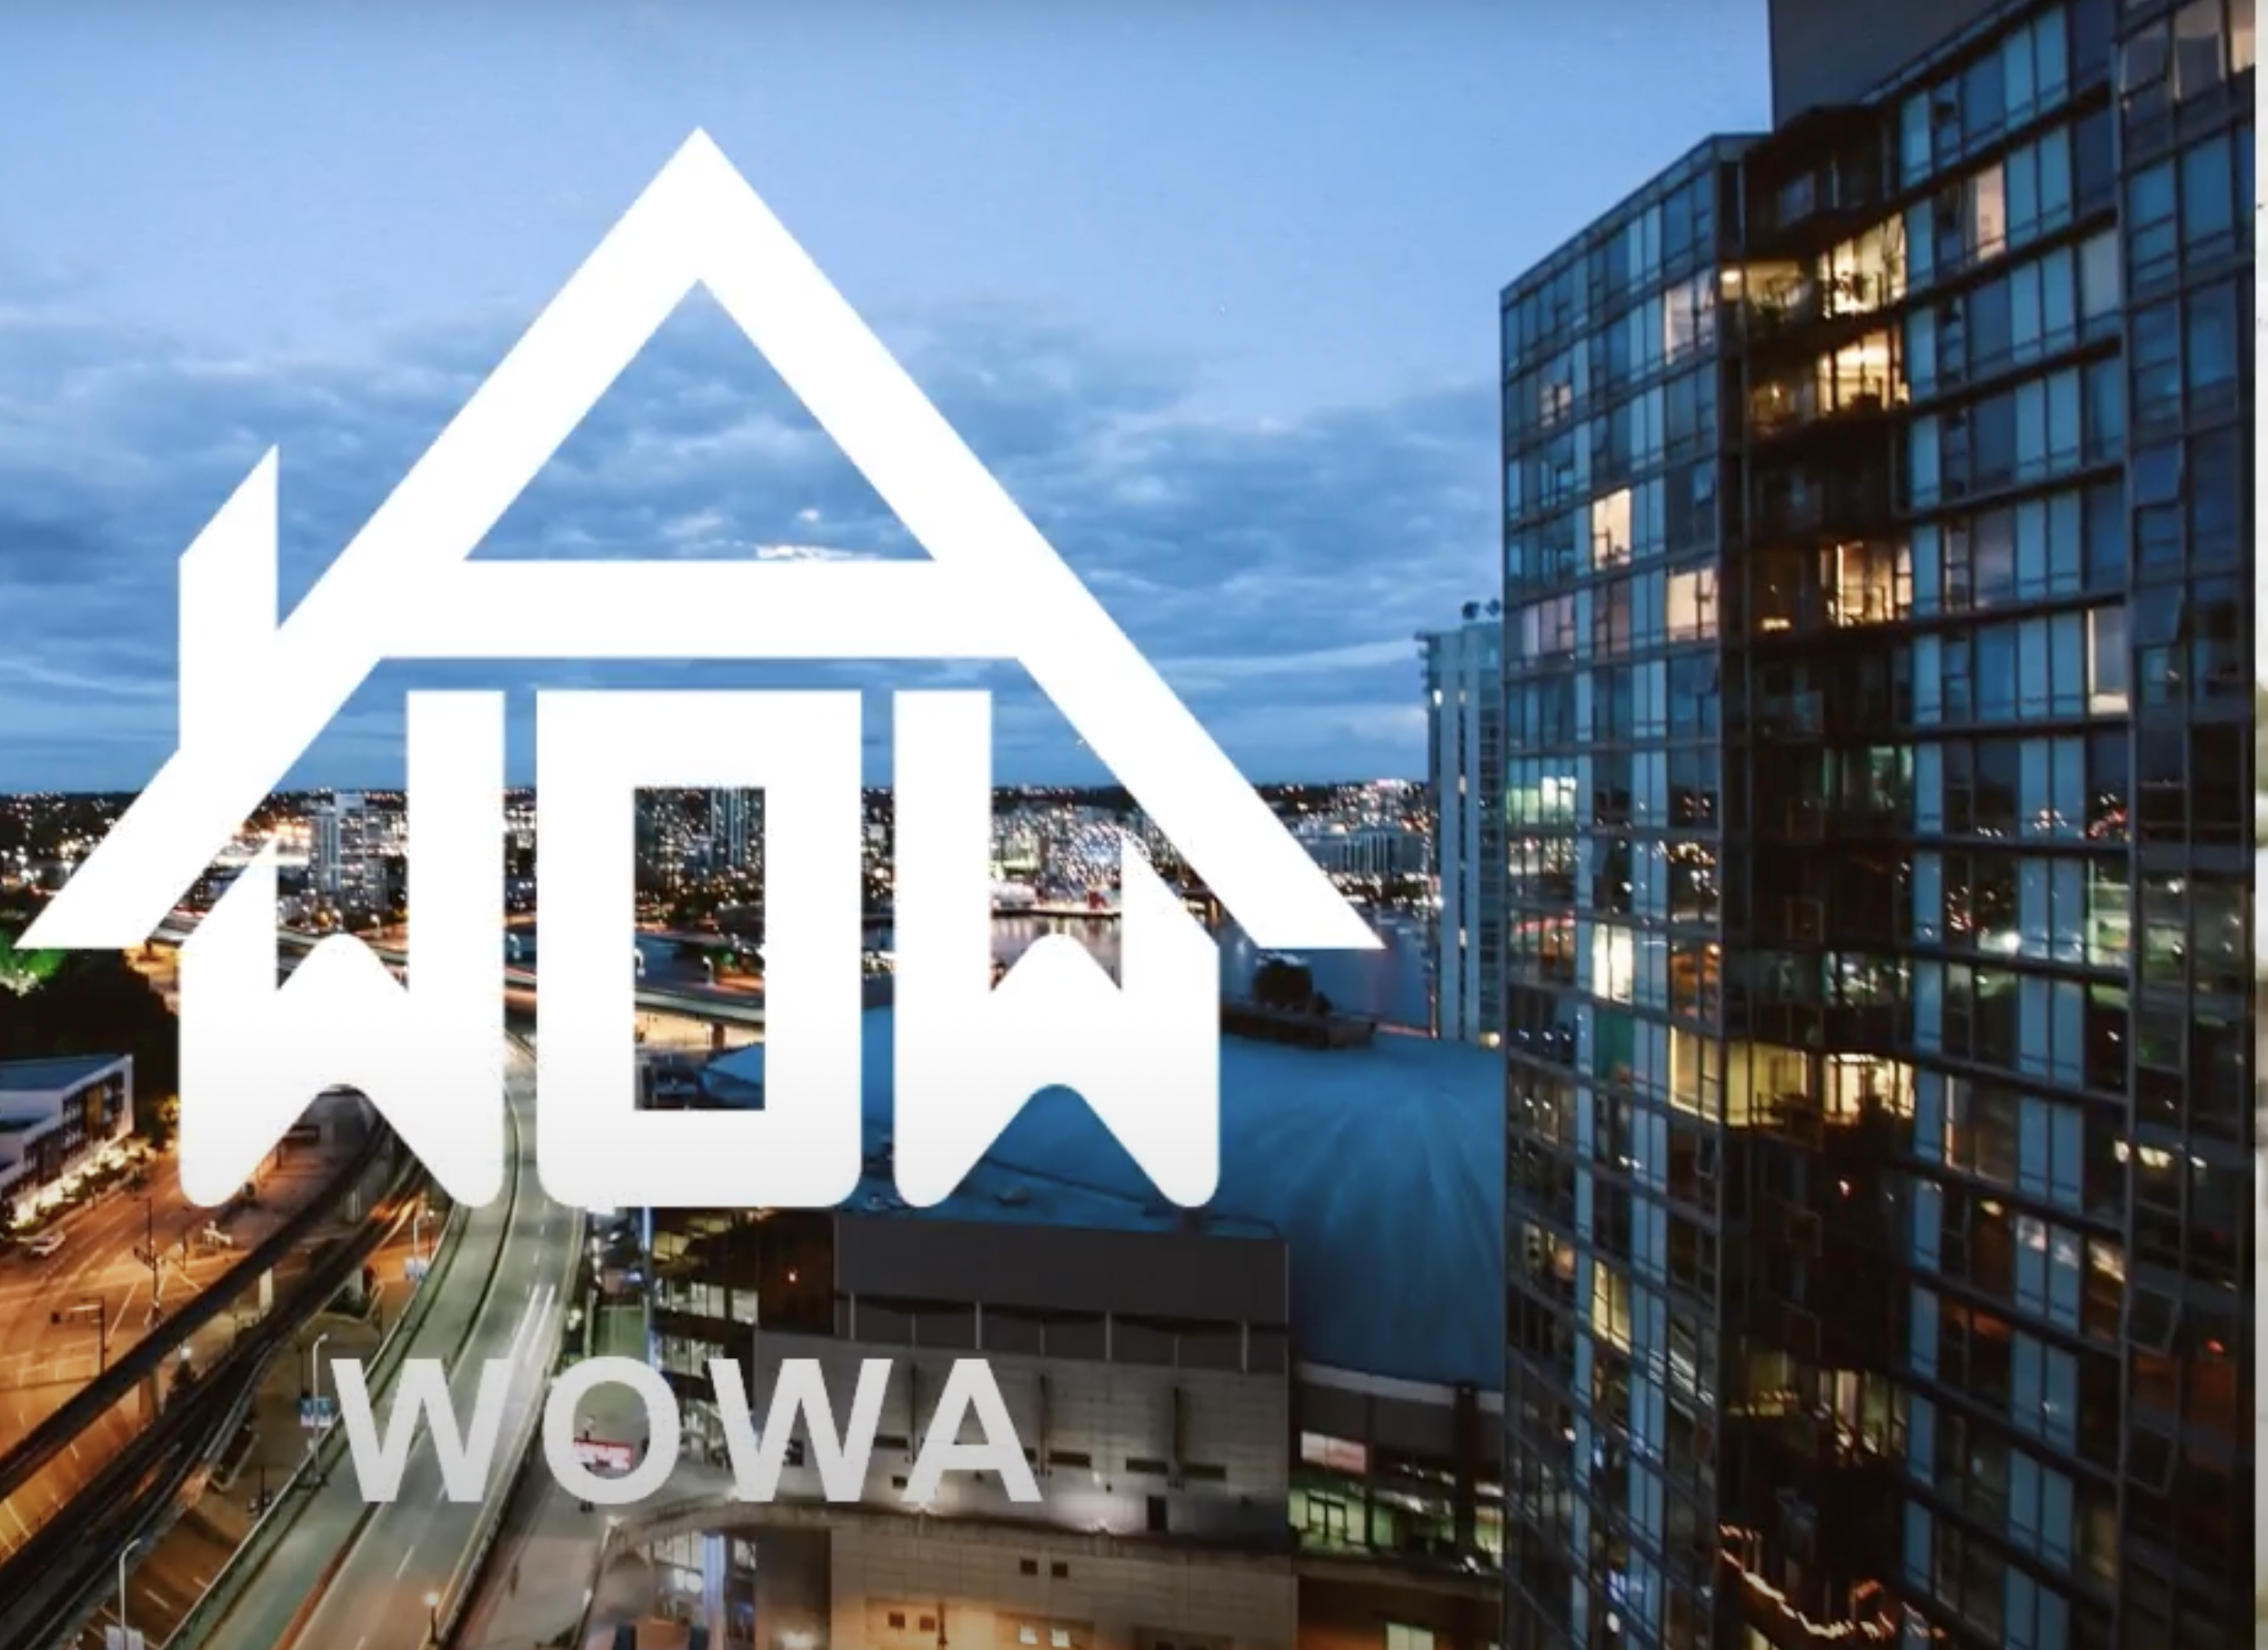 What you can learn from Wowa - Part II